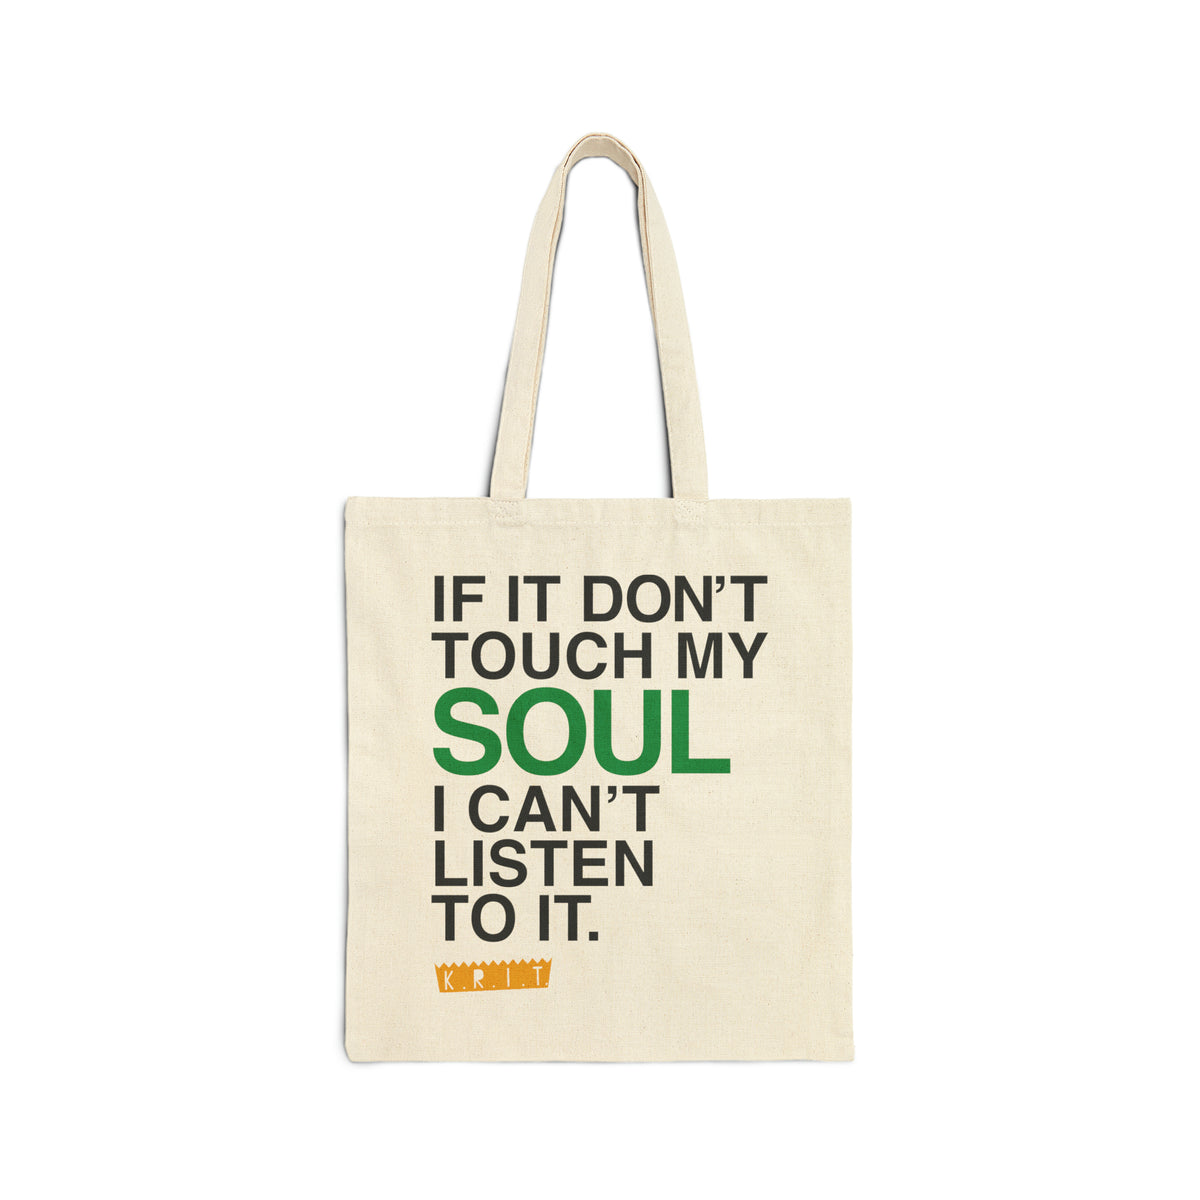 The Vent Tote Bag